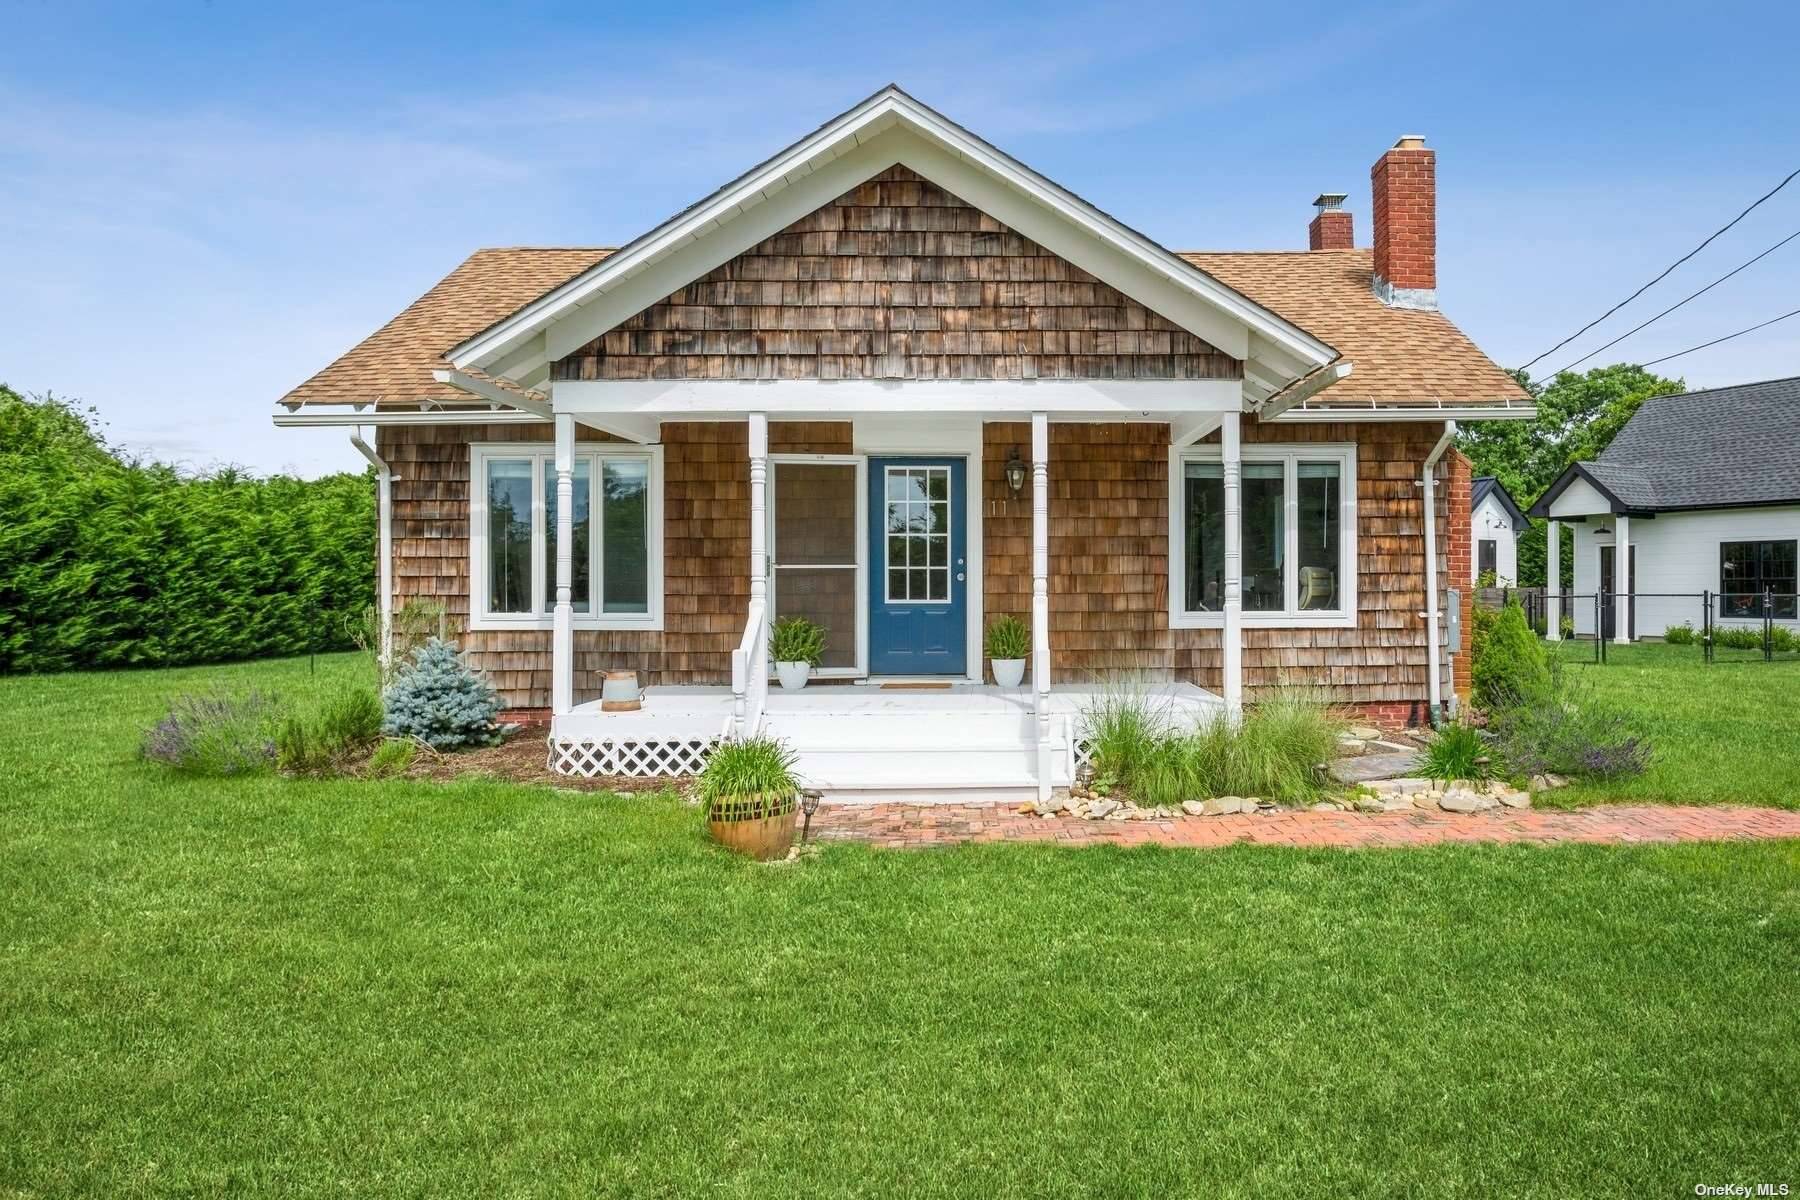 This modern storybook Hamptons cottage mixes only the most scenic and relaxing elements one could dream for in the quaint and charming town of Eastport.